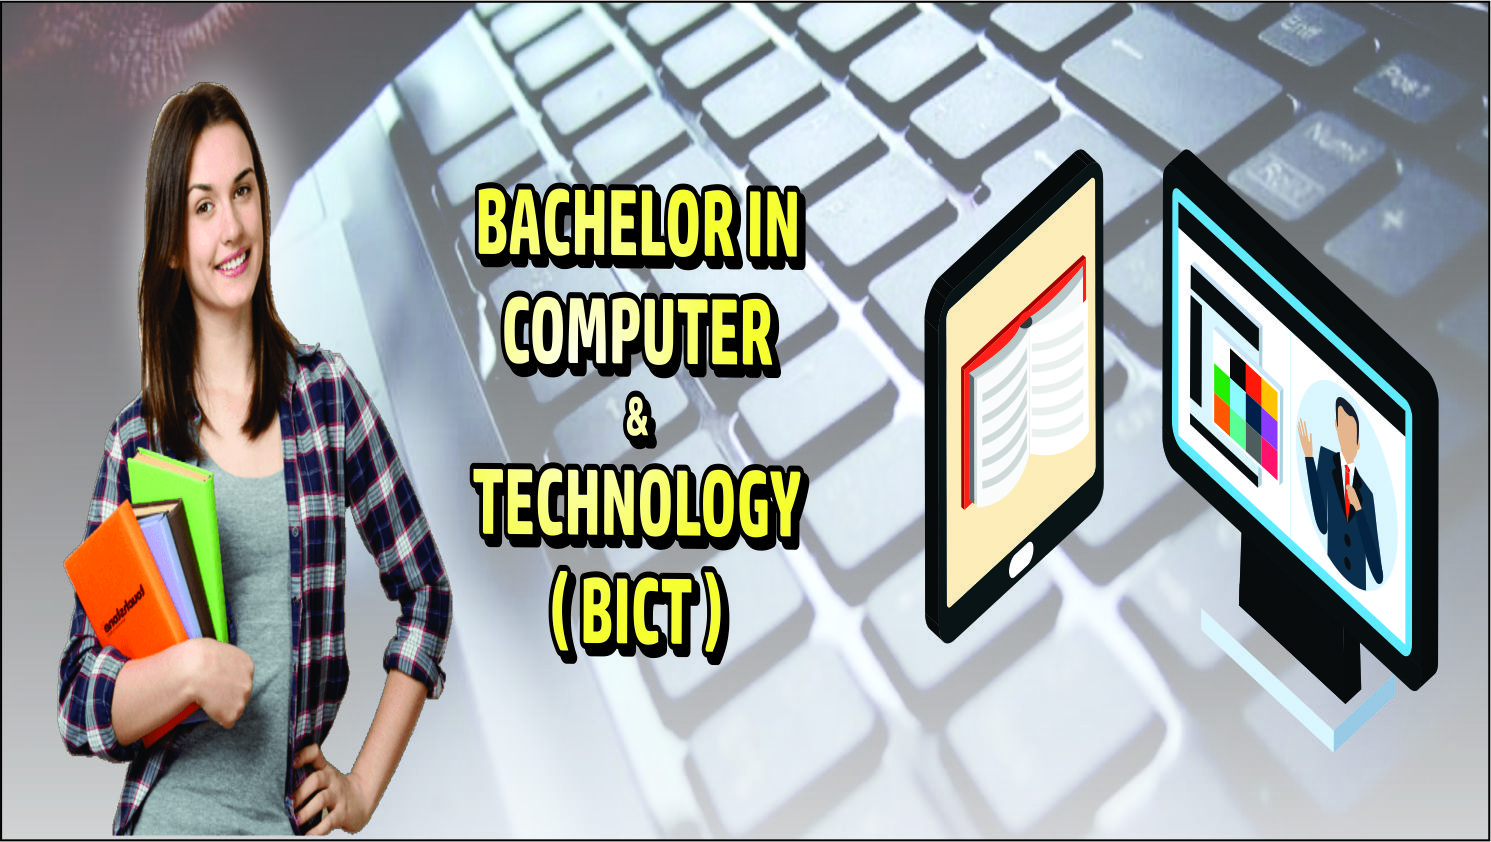 BACHELOR IN COMPUTER & TECHNOLOGY ( BICT )